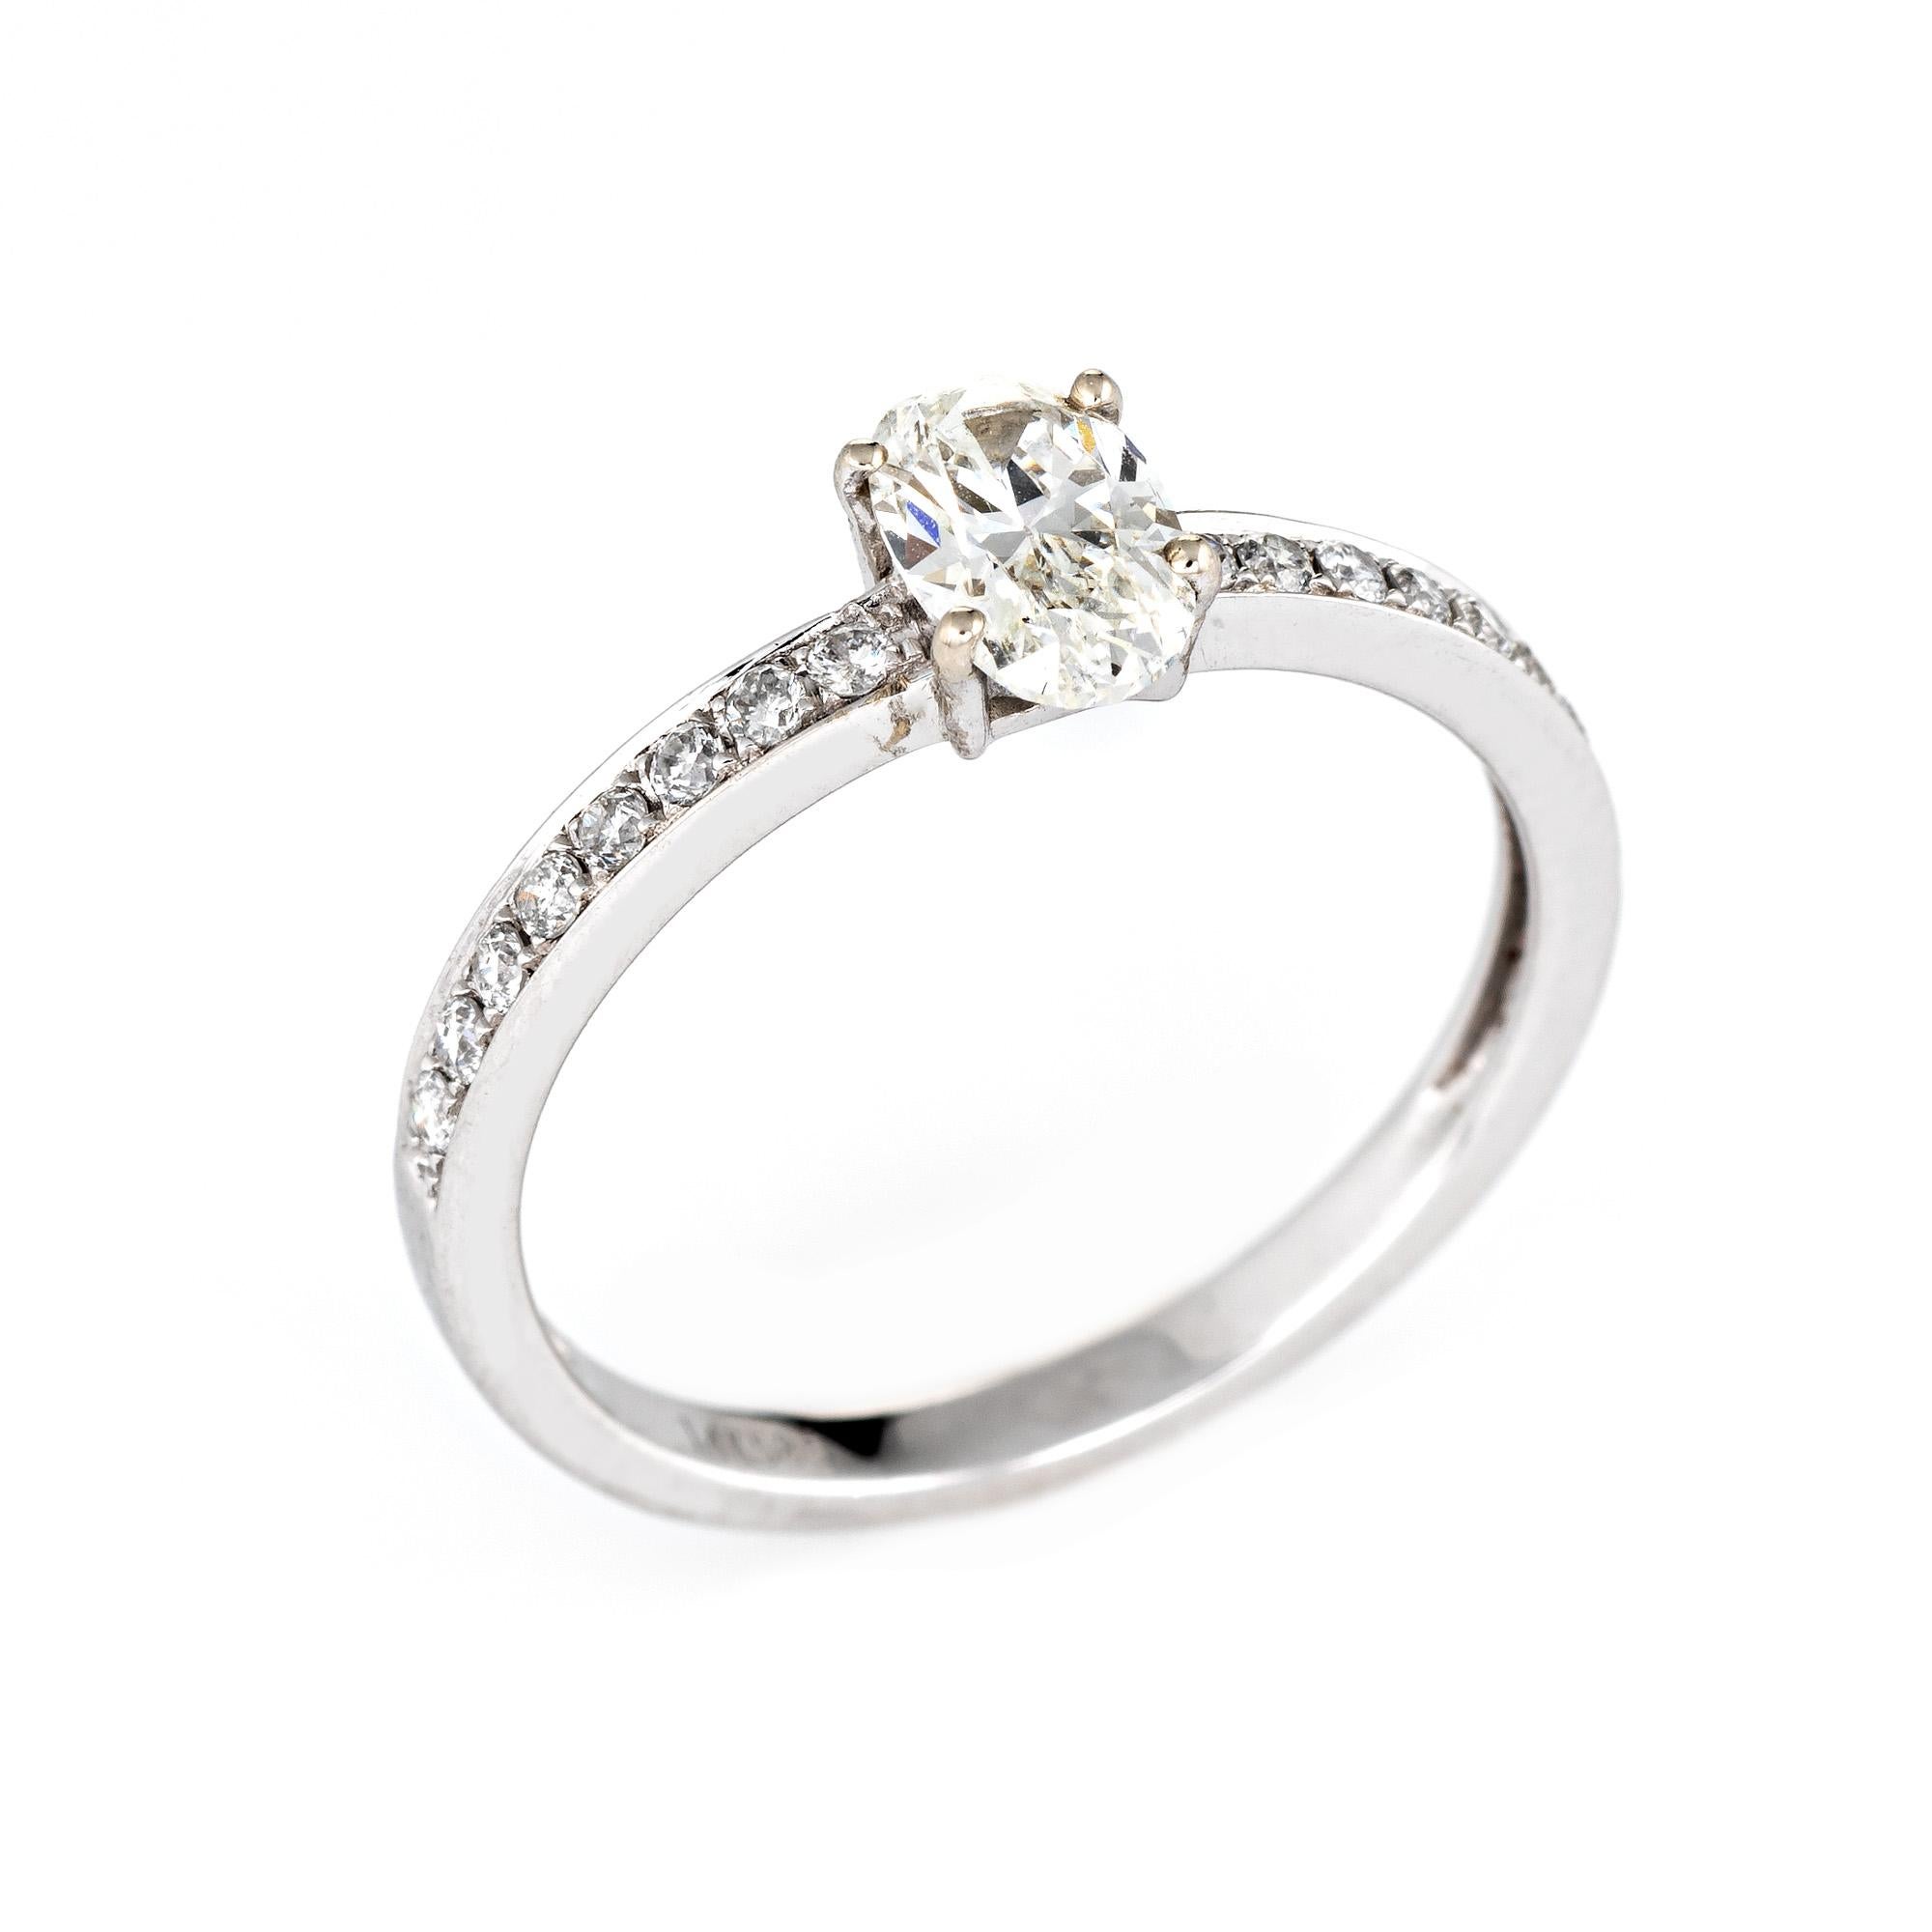 Stylish diamond engagement ring crafted in 14 karat white gold. 

Centrally mounted oval cut diamond is estimated at 0.86 carats, accented with 16 estimated 0.01 carat diamonds. The total diamond weight is estimated at 1.02 carats (estimated at I-J